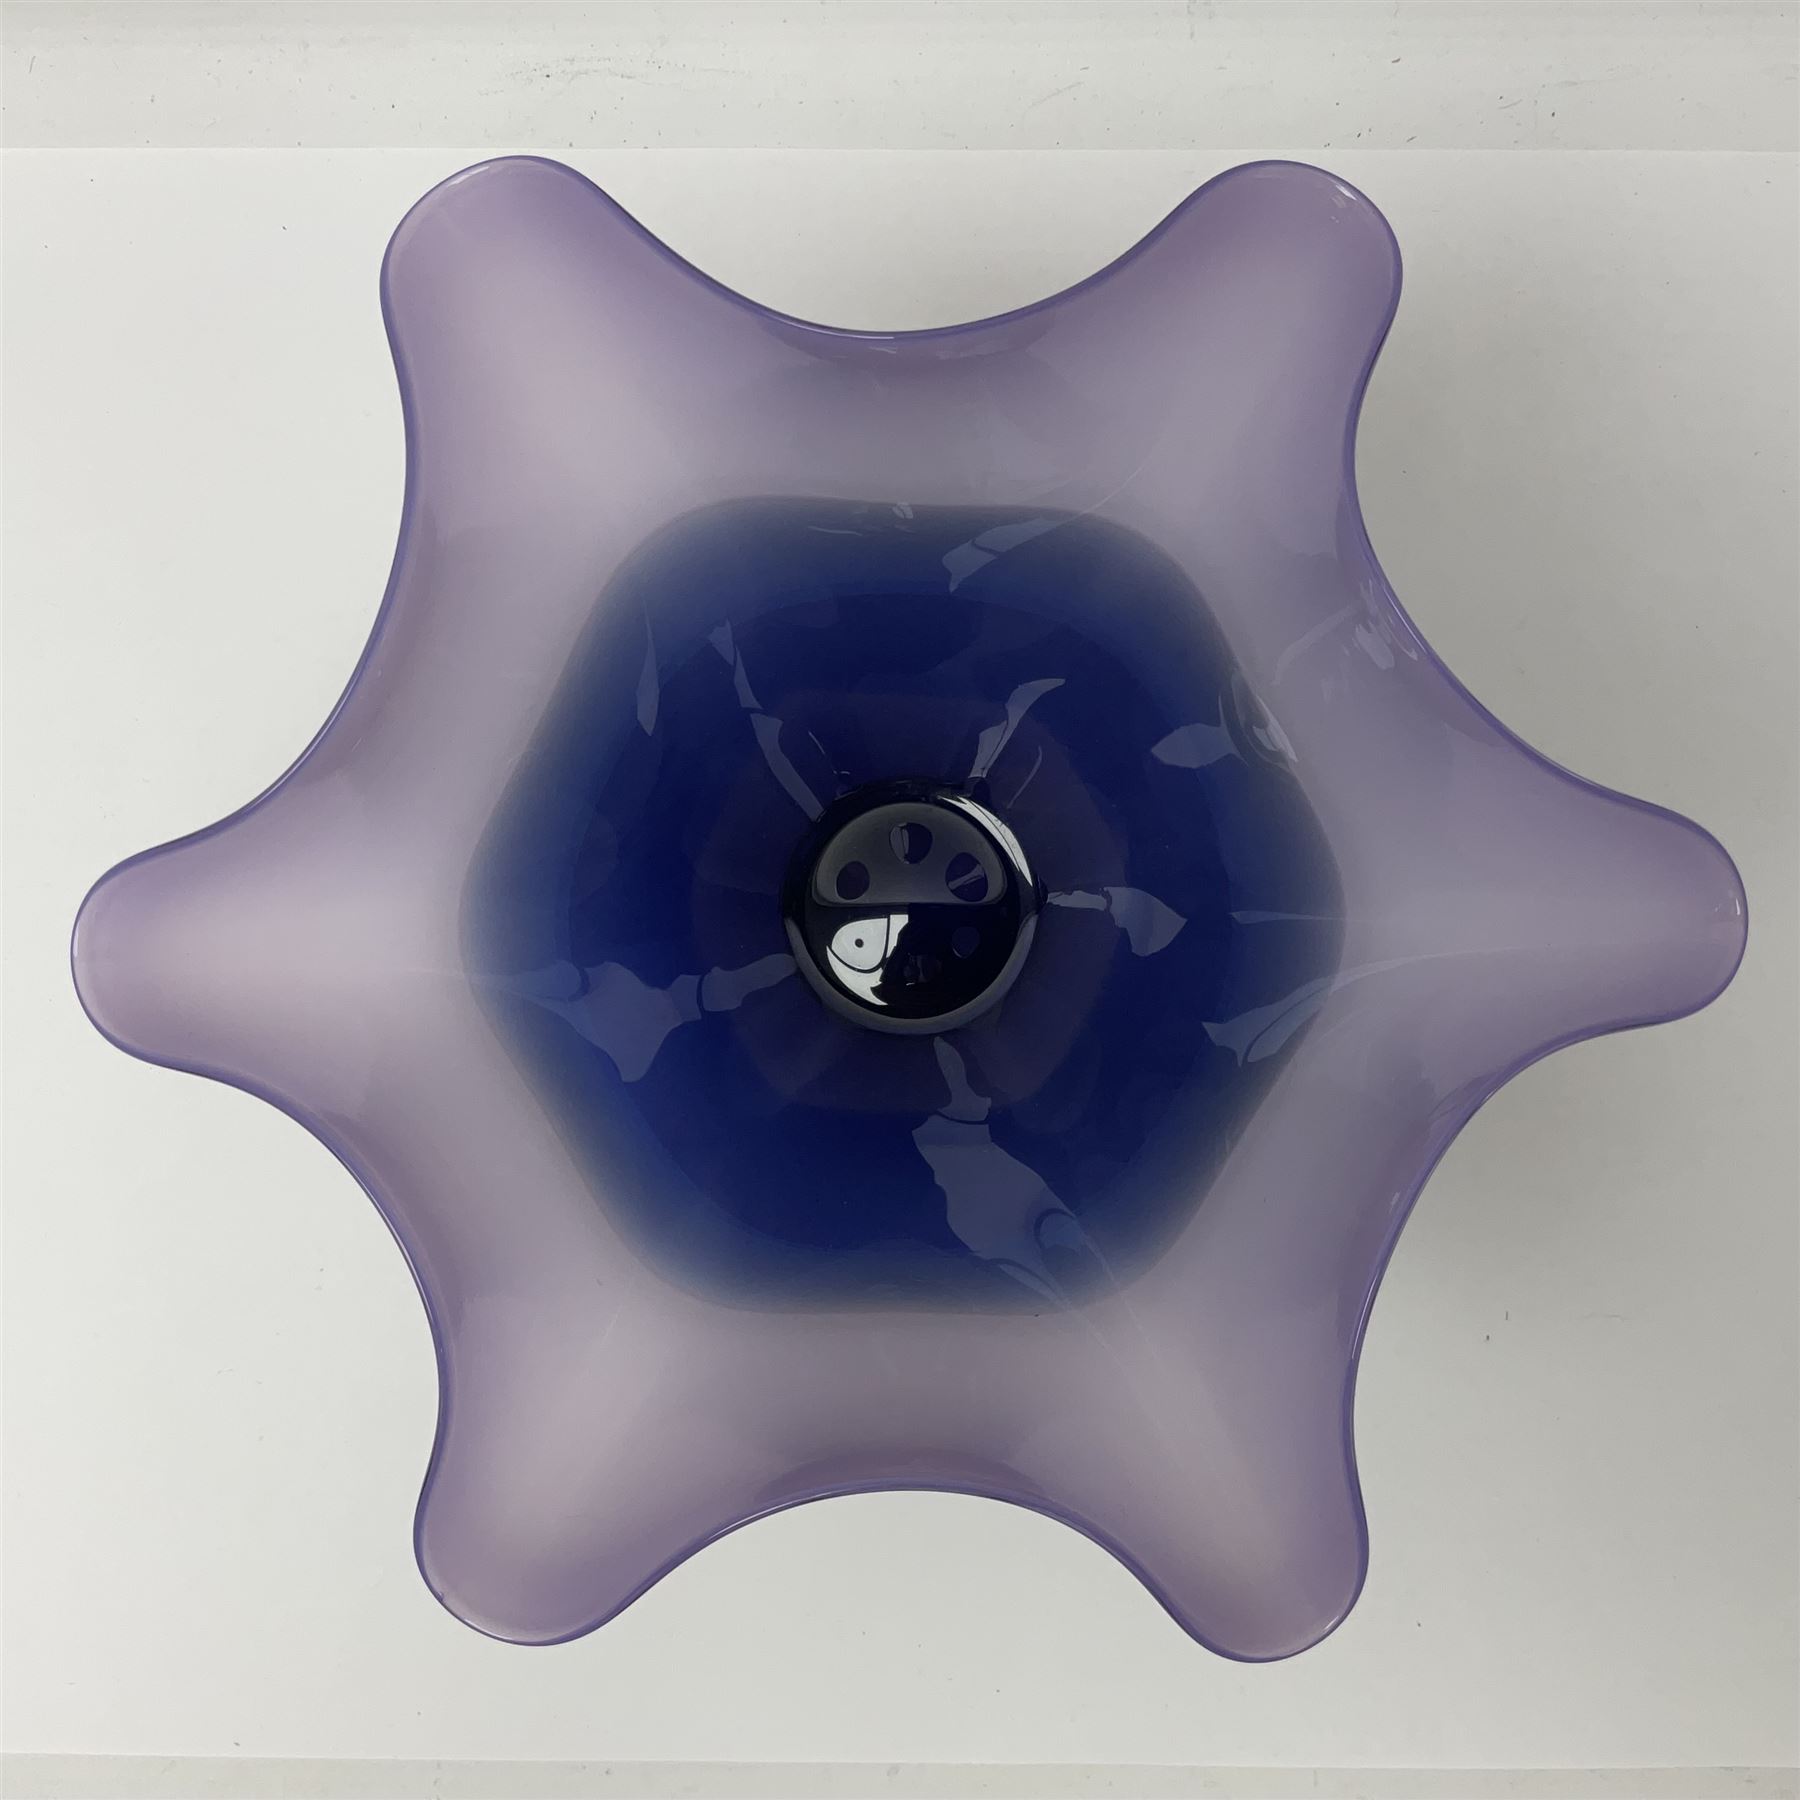 Gillies Jones of Rosedale two tone purple glass vase with crimped rim on a short pedestal foot - Image 3 of 7